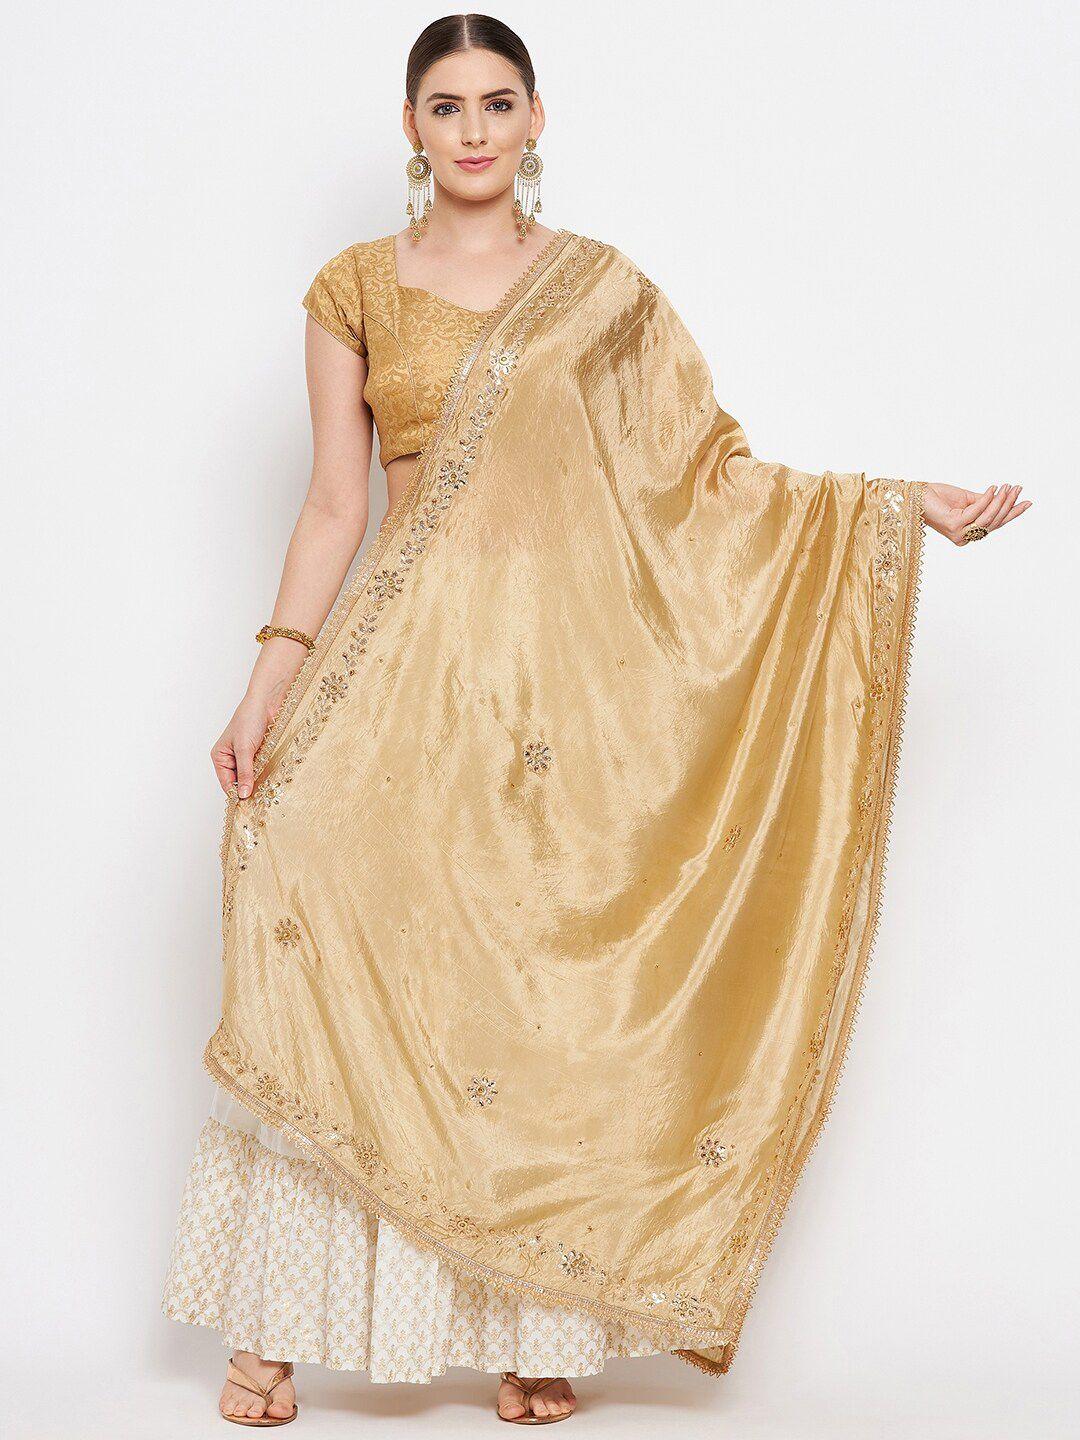 Clora Creation Gold-Toned Ethnic Motifs Embroidered Dupatta